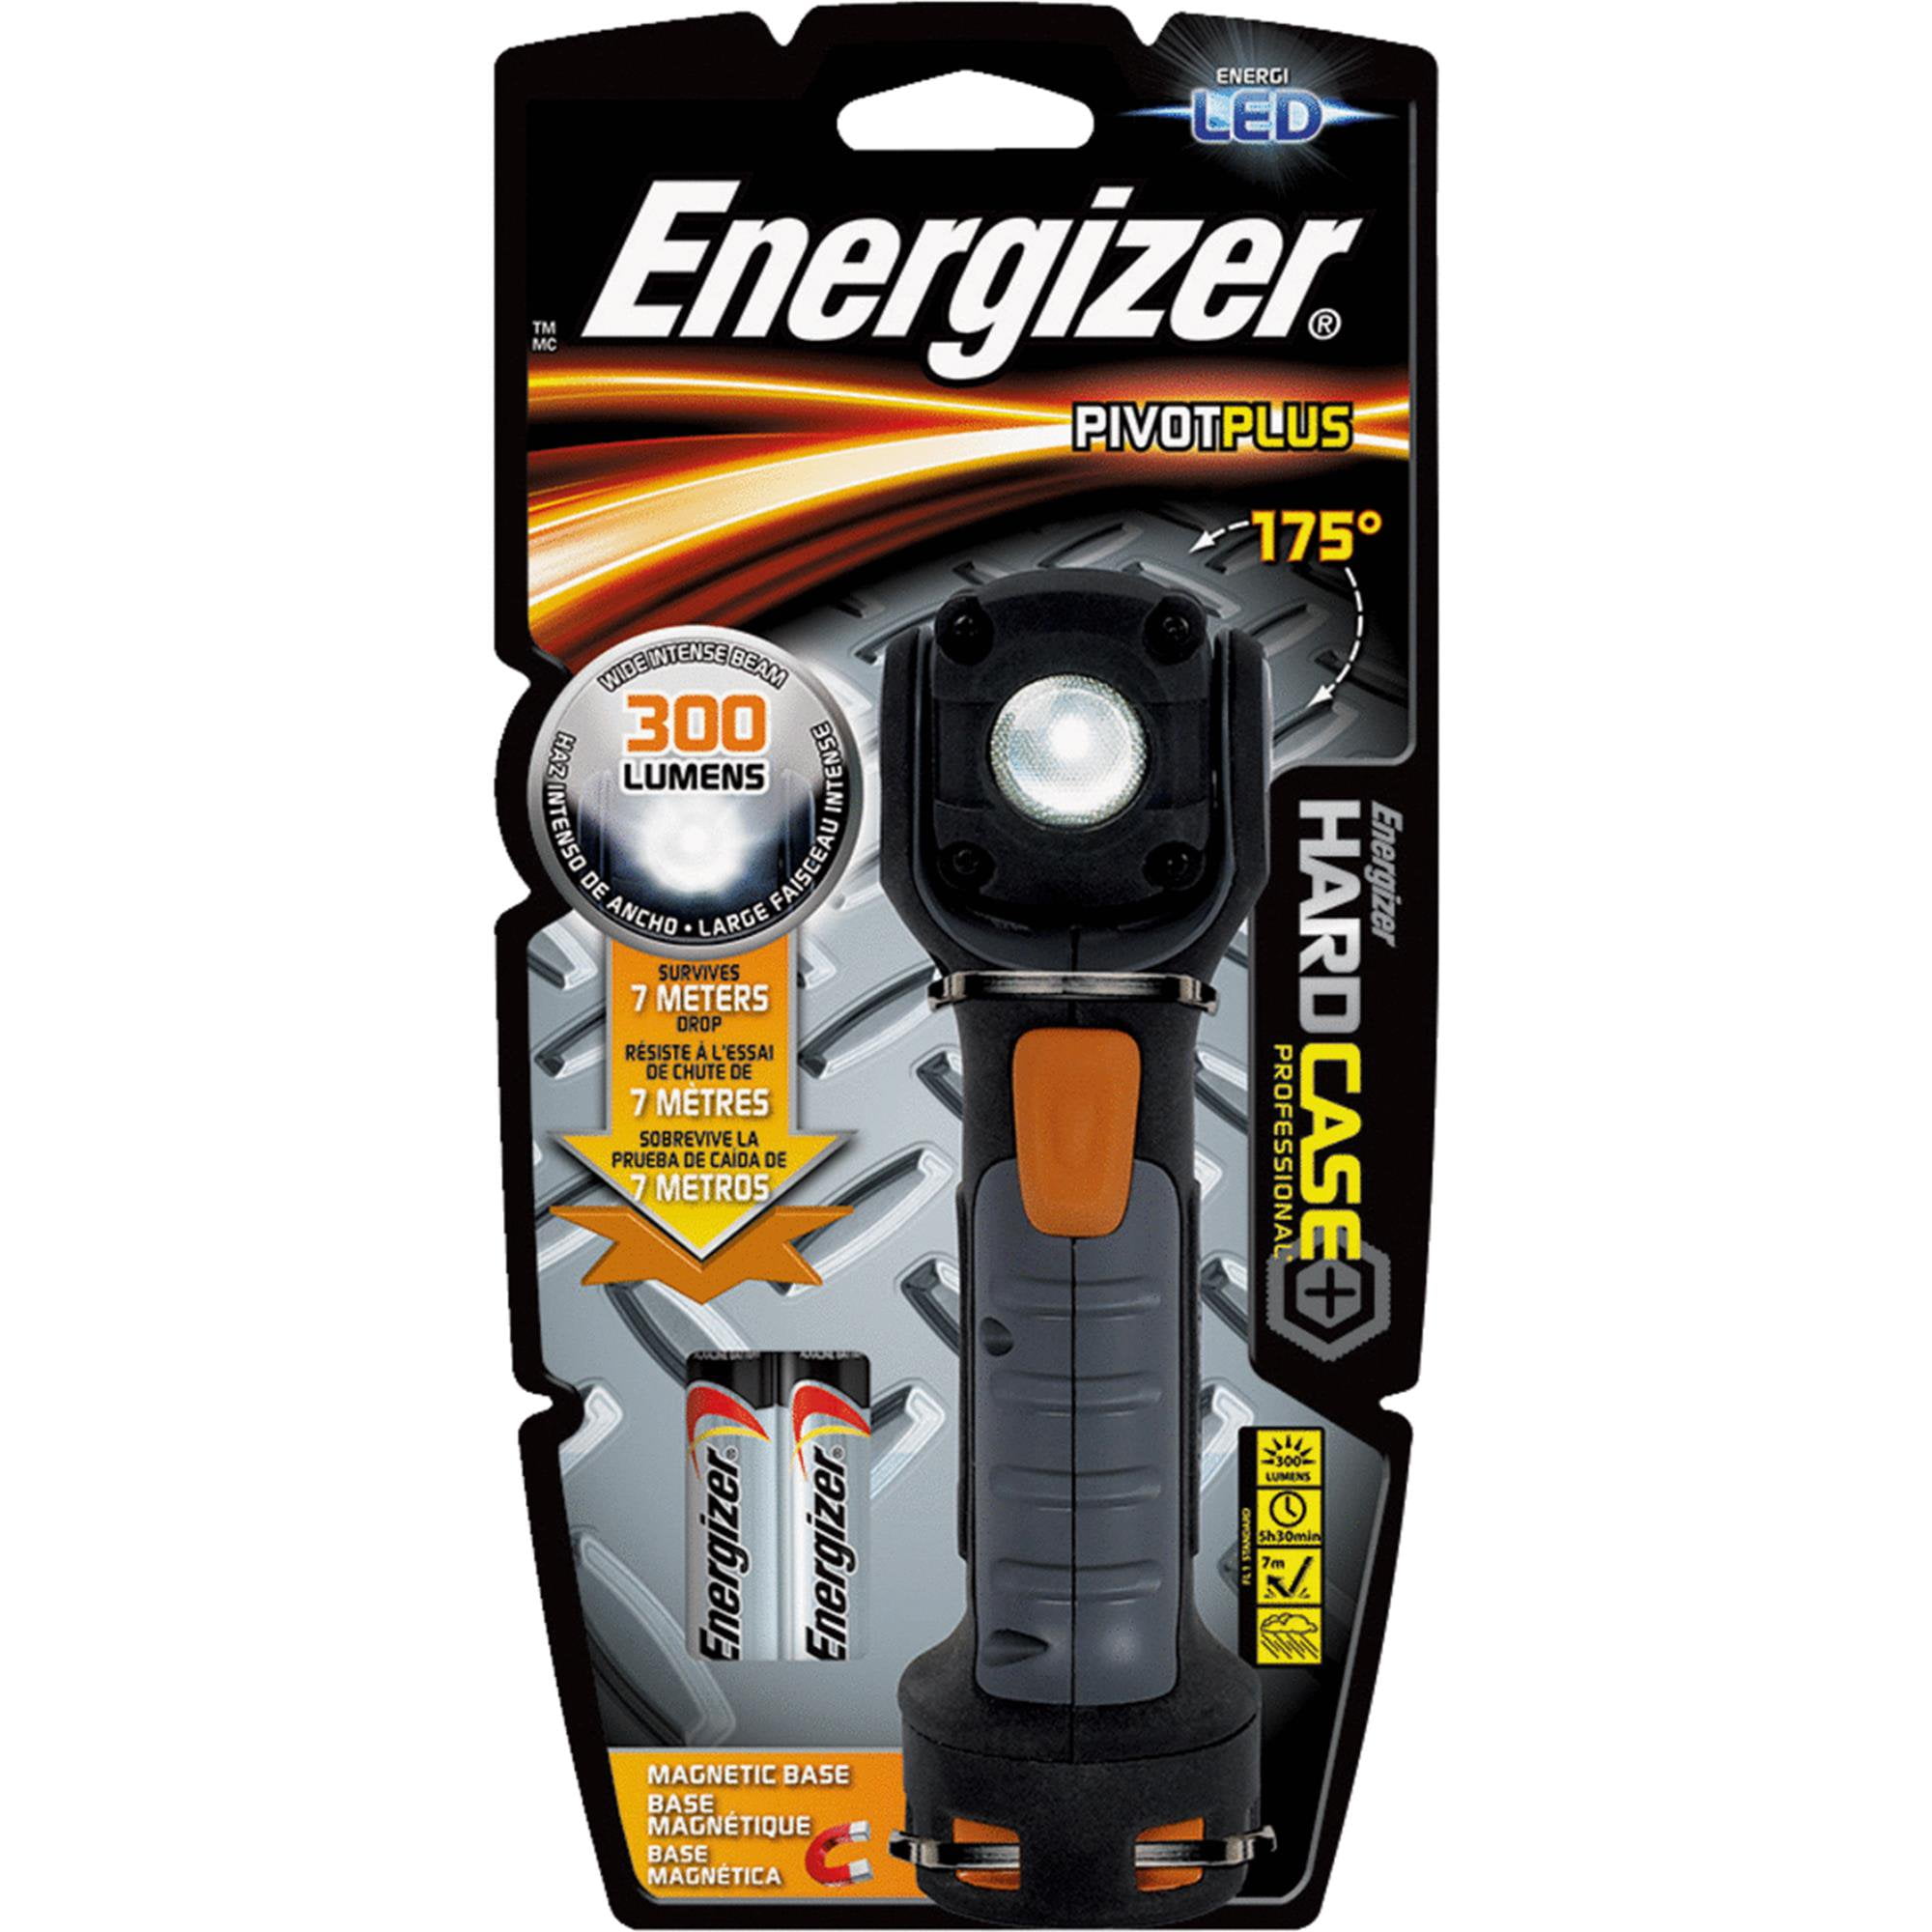 Hard Case Work Energizer PivotPlus Lumens AA Professional Included) Light, 300 (Batteries Time, Run Hour Light, 5 LED